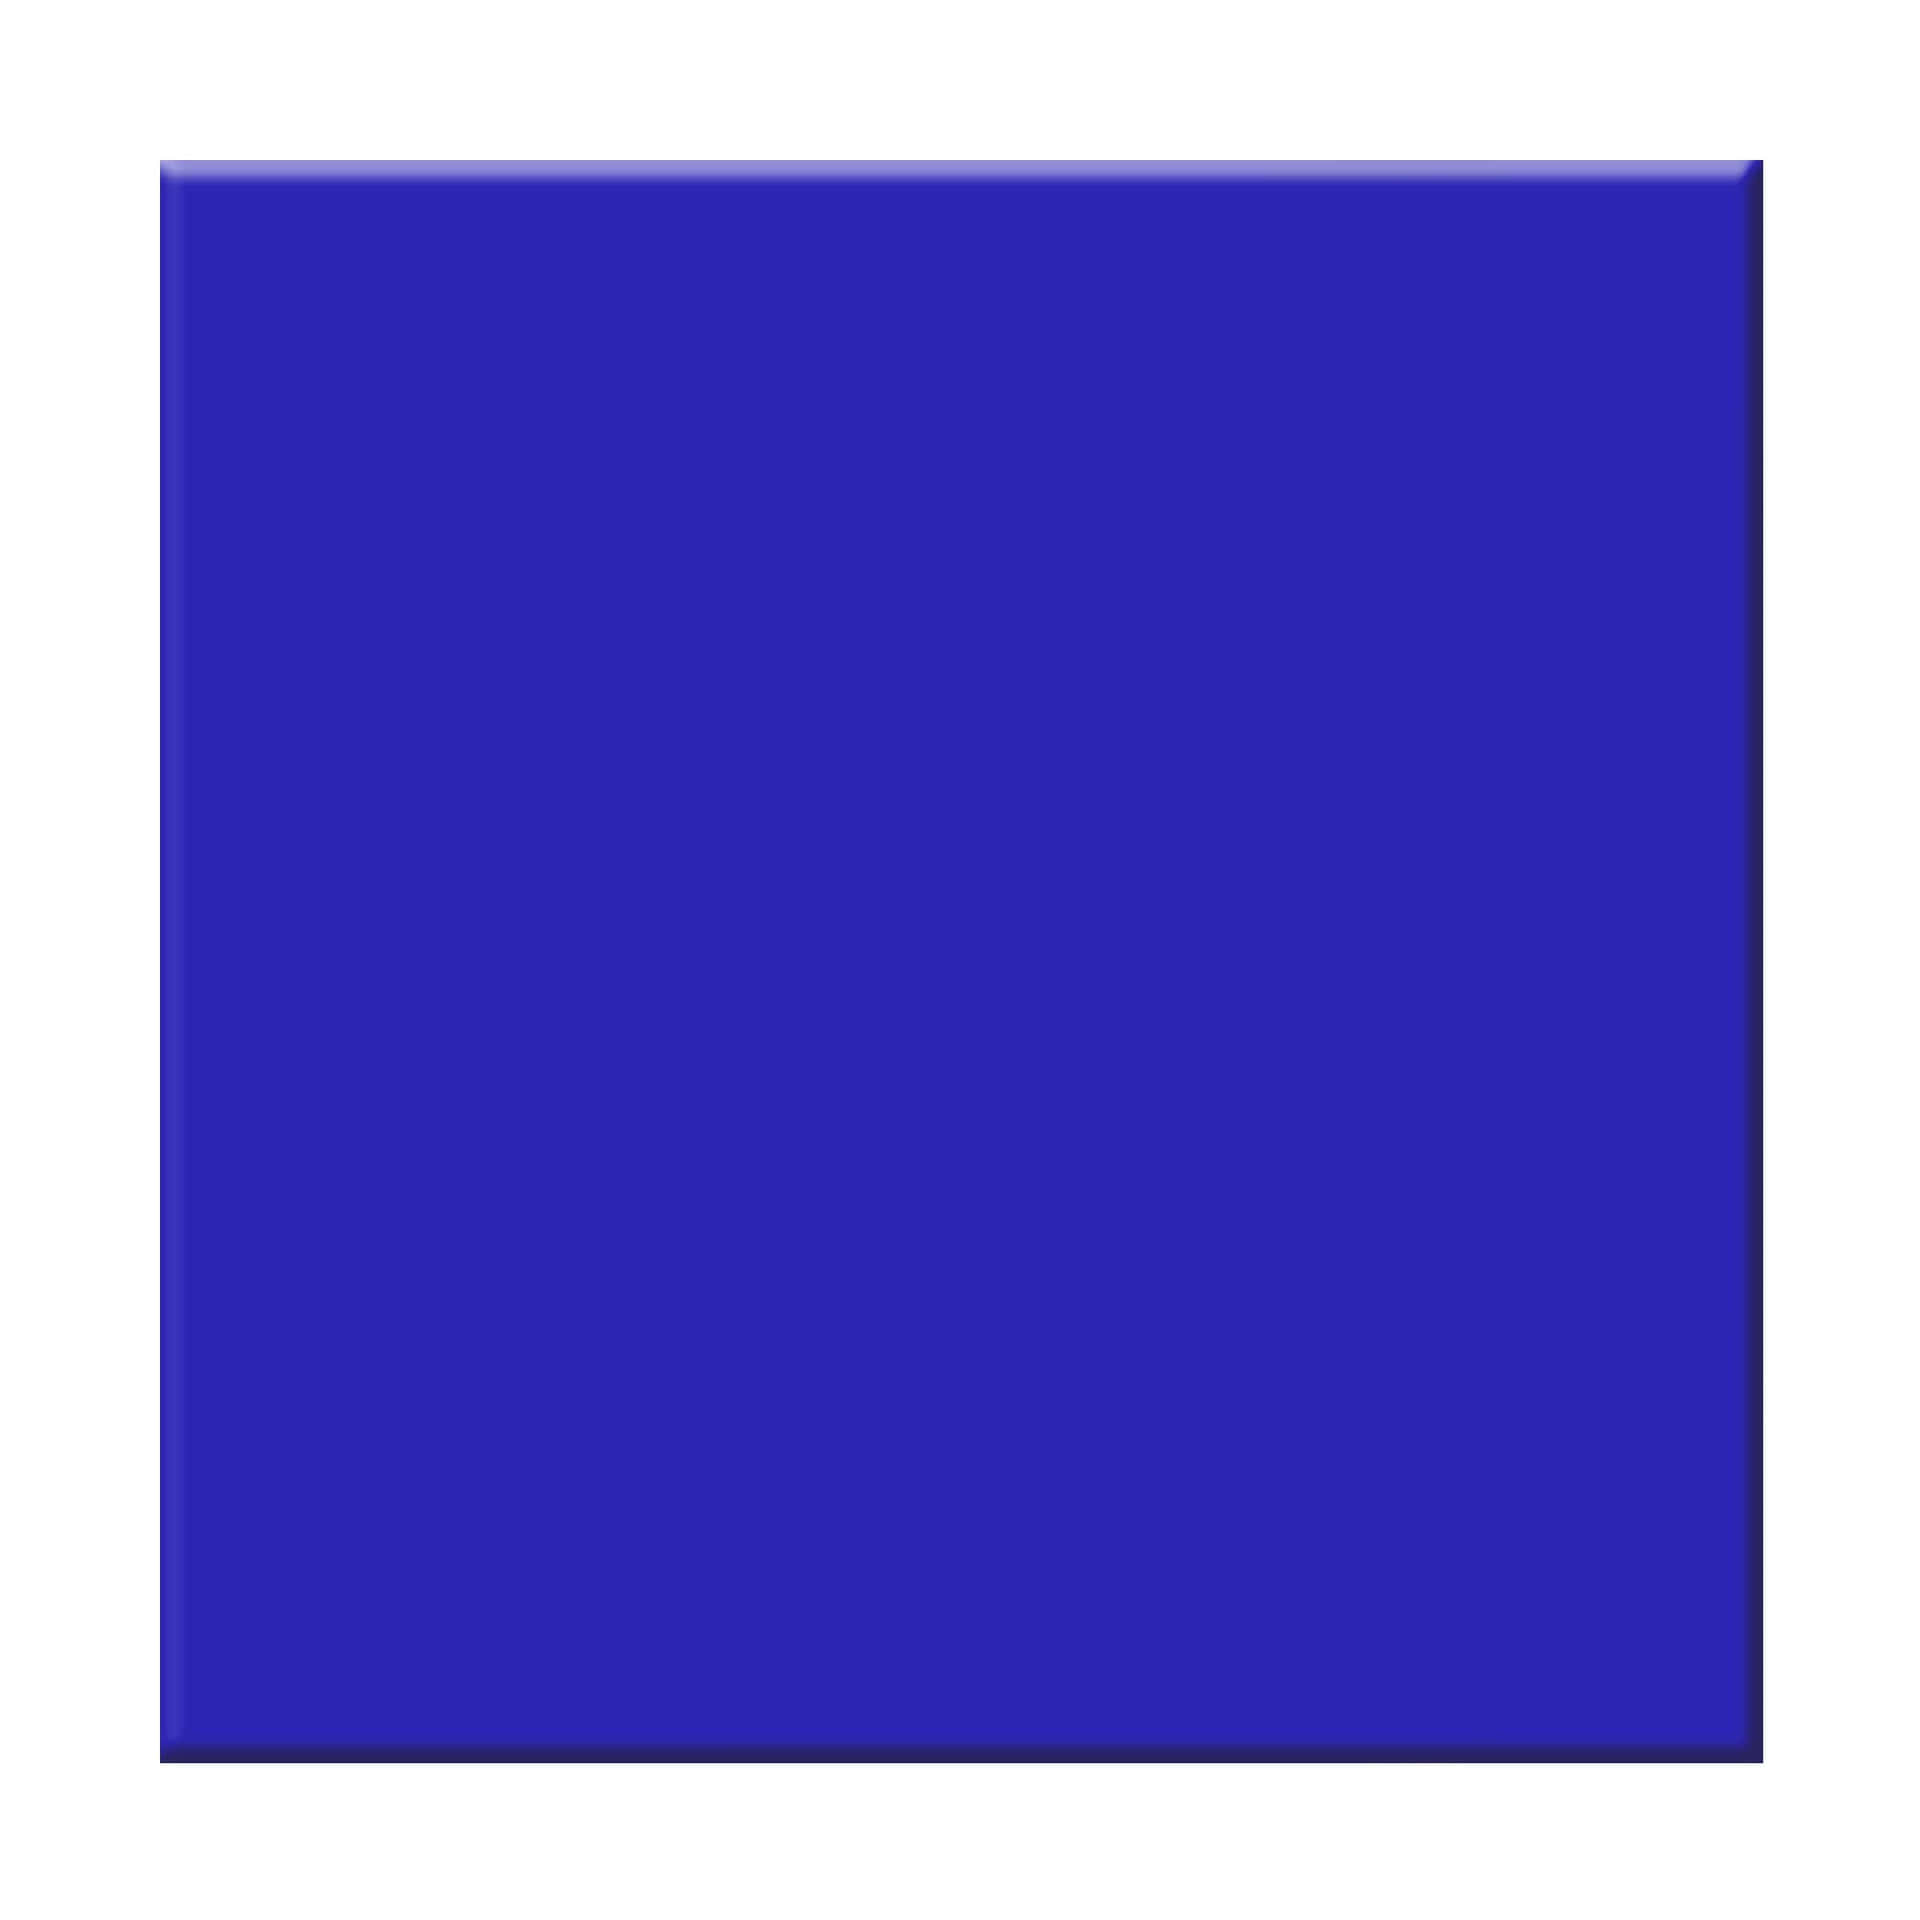 A Square Blue Tile On A White Background